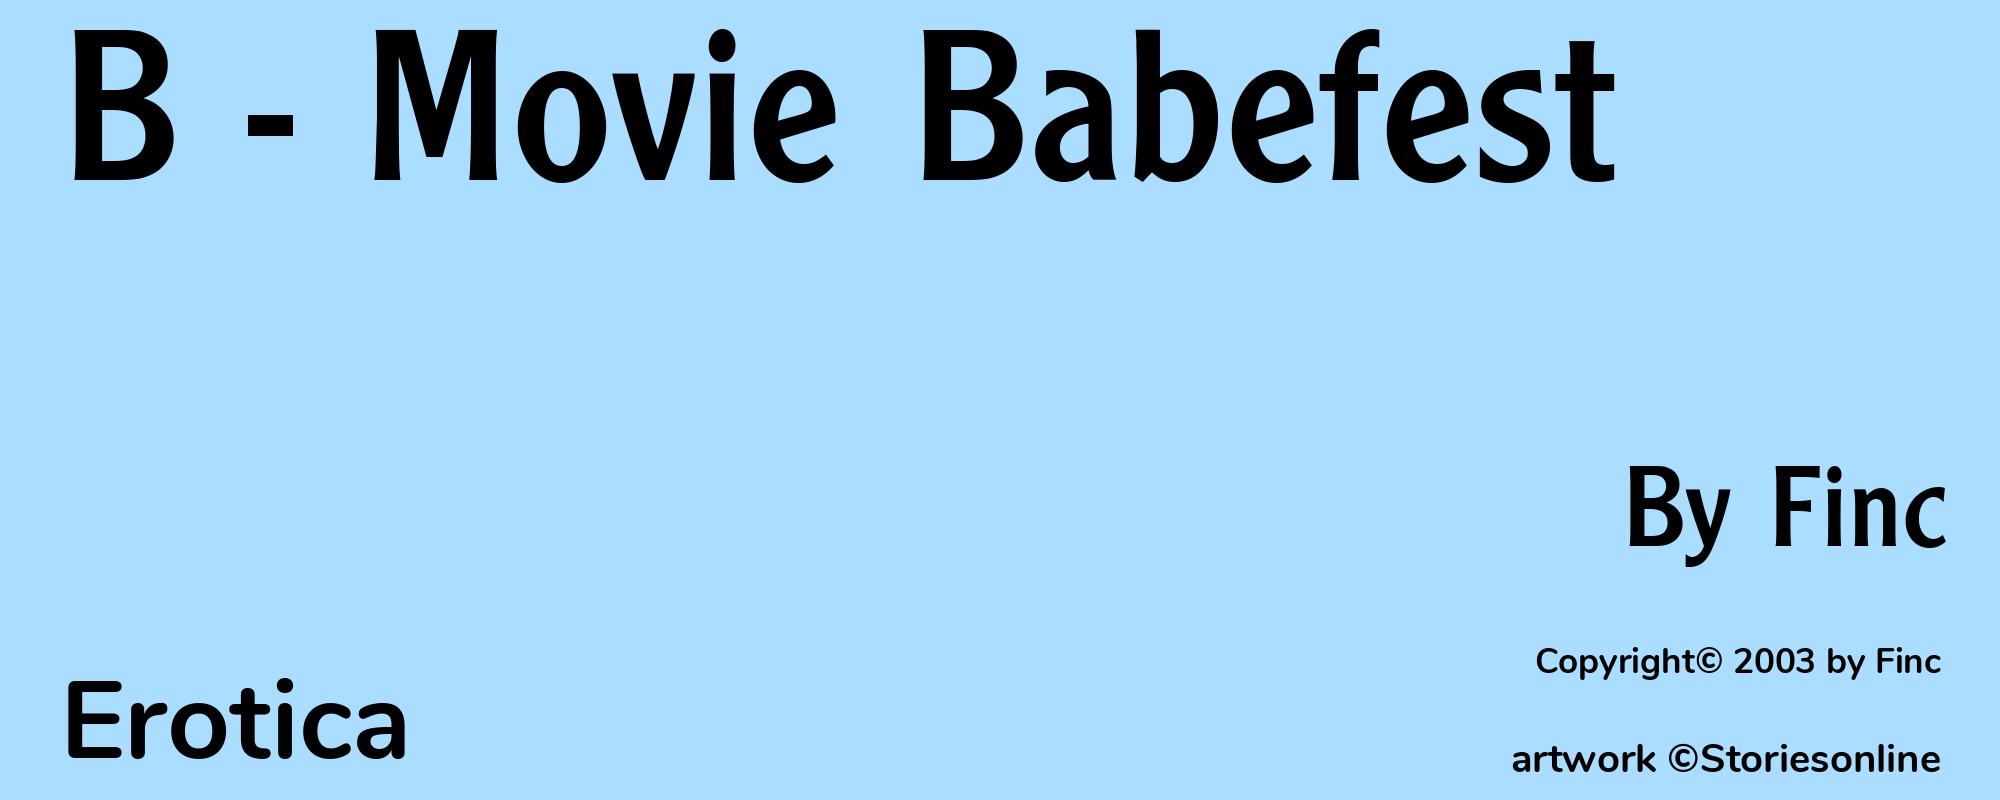 B - Movie Babefest - Cover